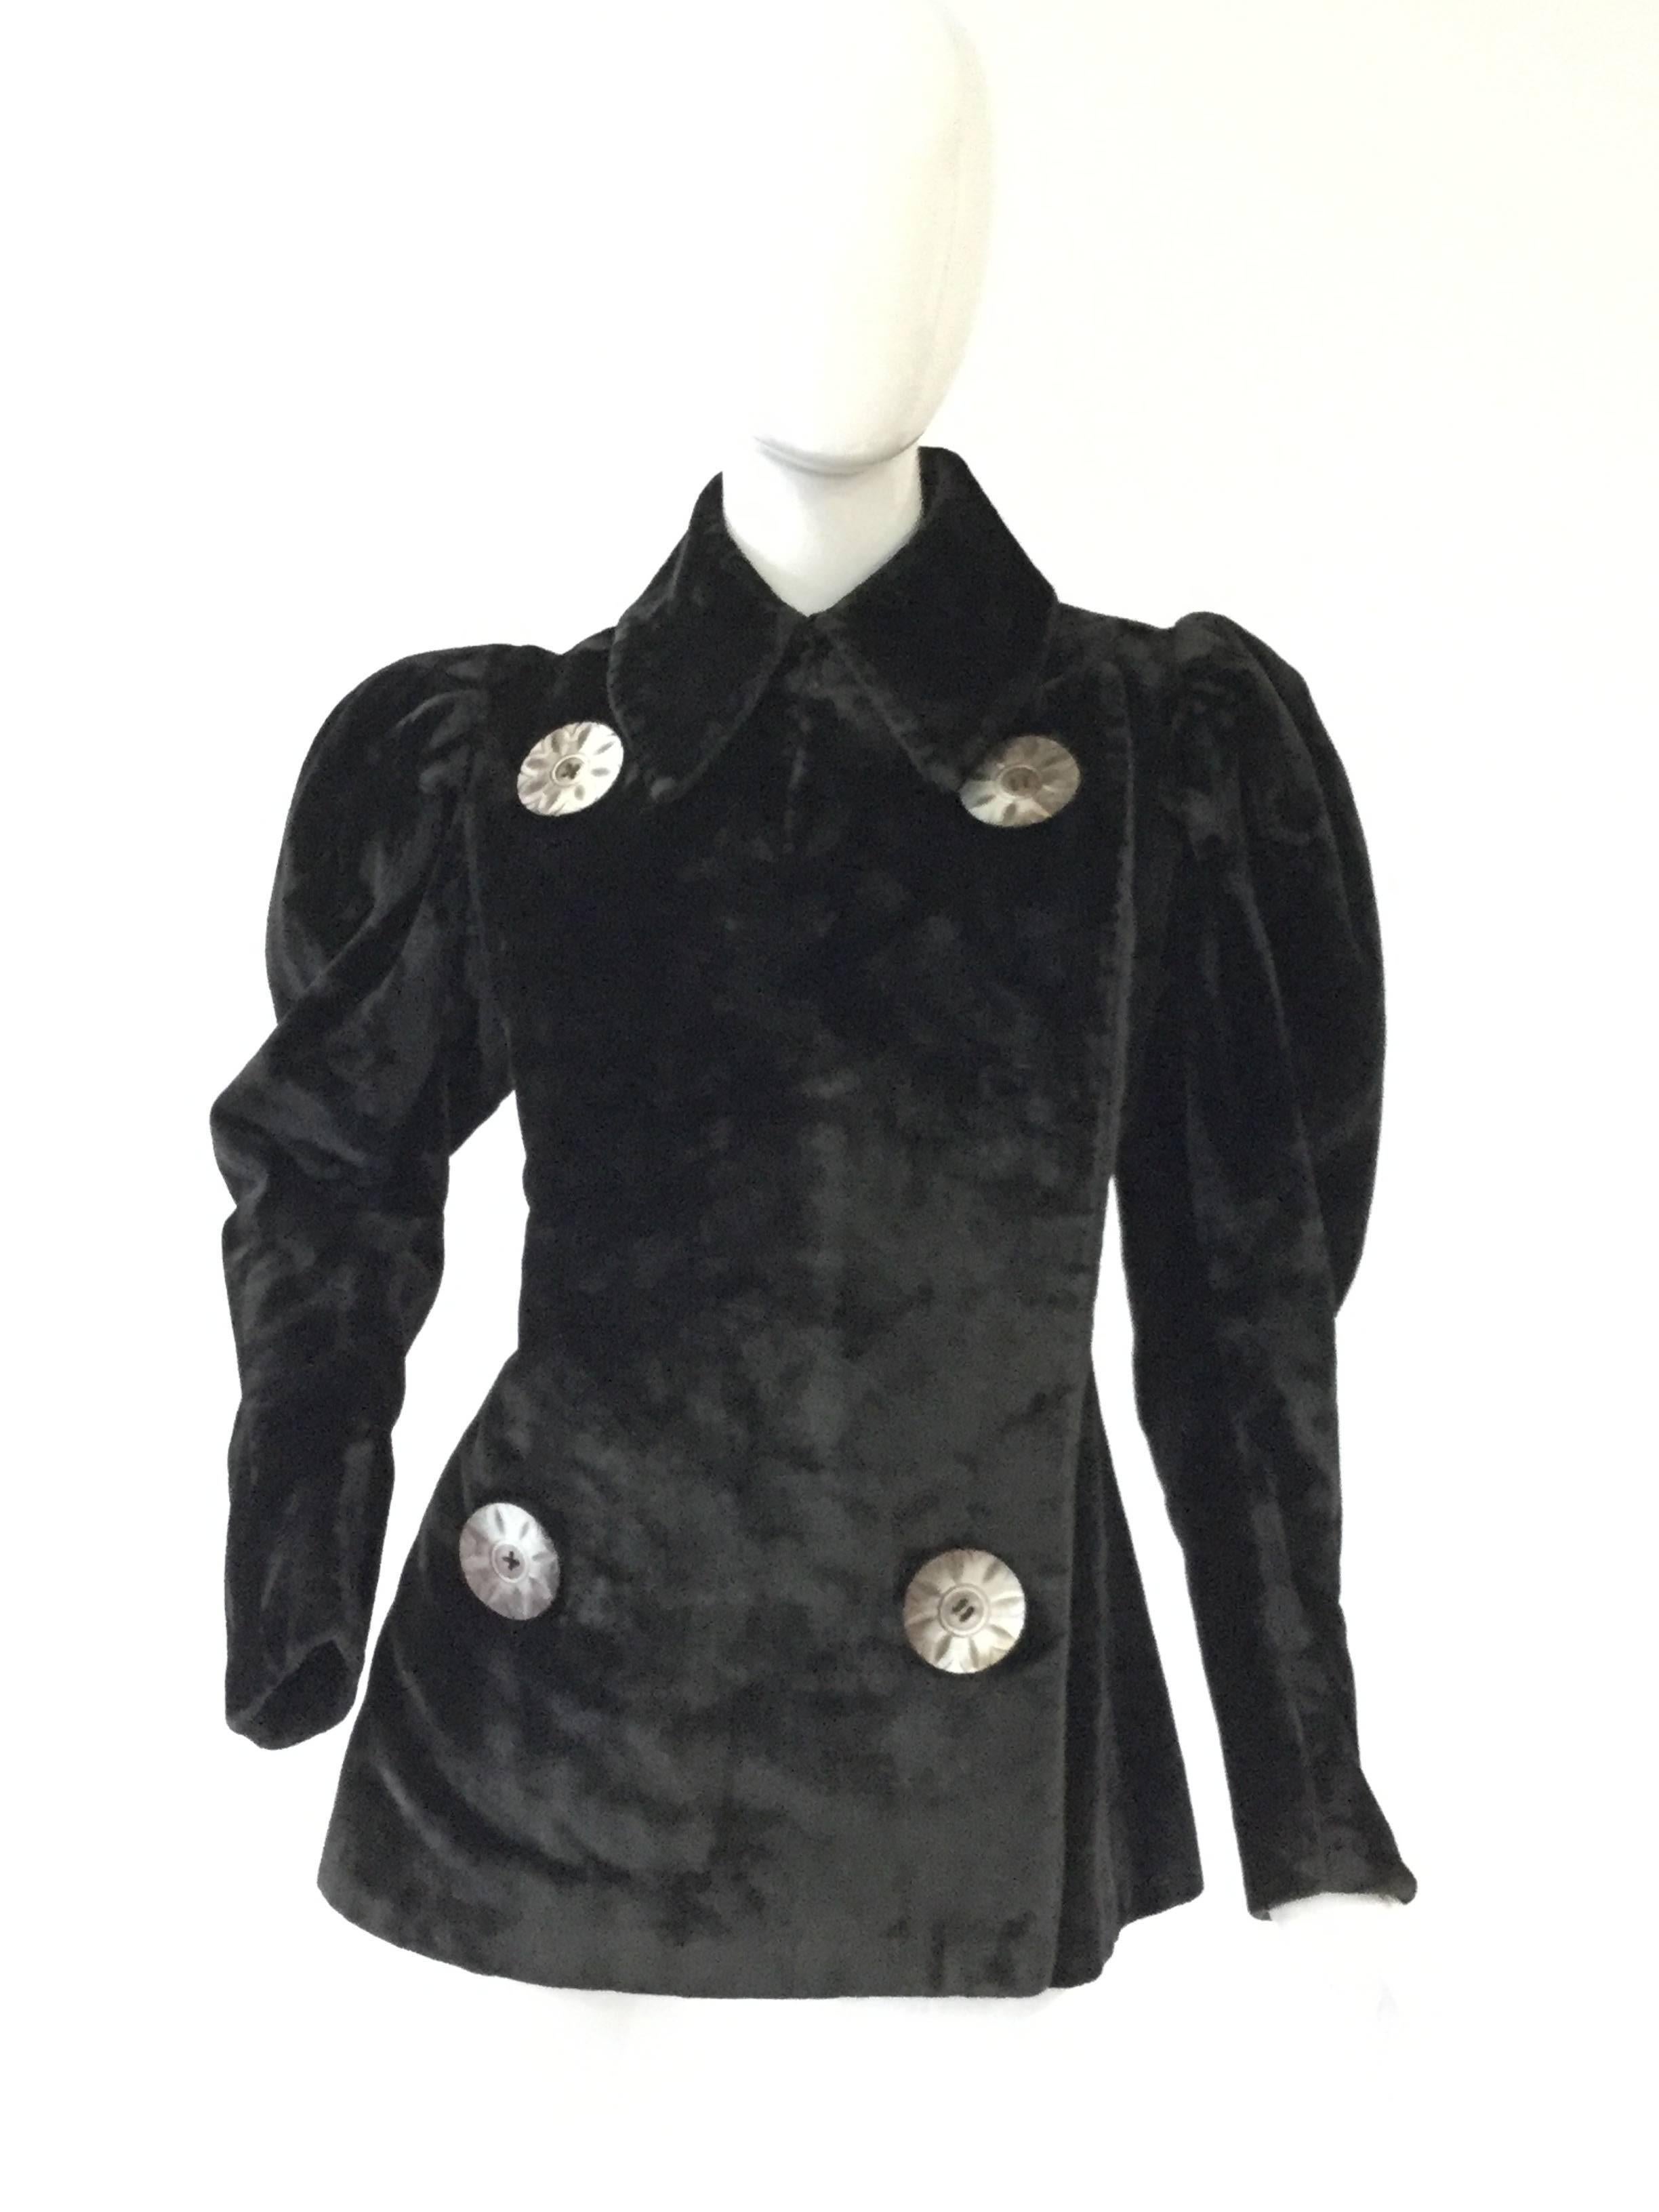 
Stunning. This impeccably preserved velvet coat has long mutton sleeves, tall lapel collar, a long overlapping breast panel, and a pleated peplum back originally designed to fit over a bustle! The massive mother of pearl buttons with a radial